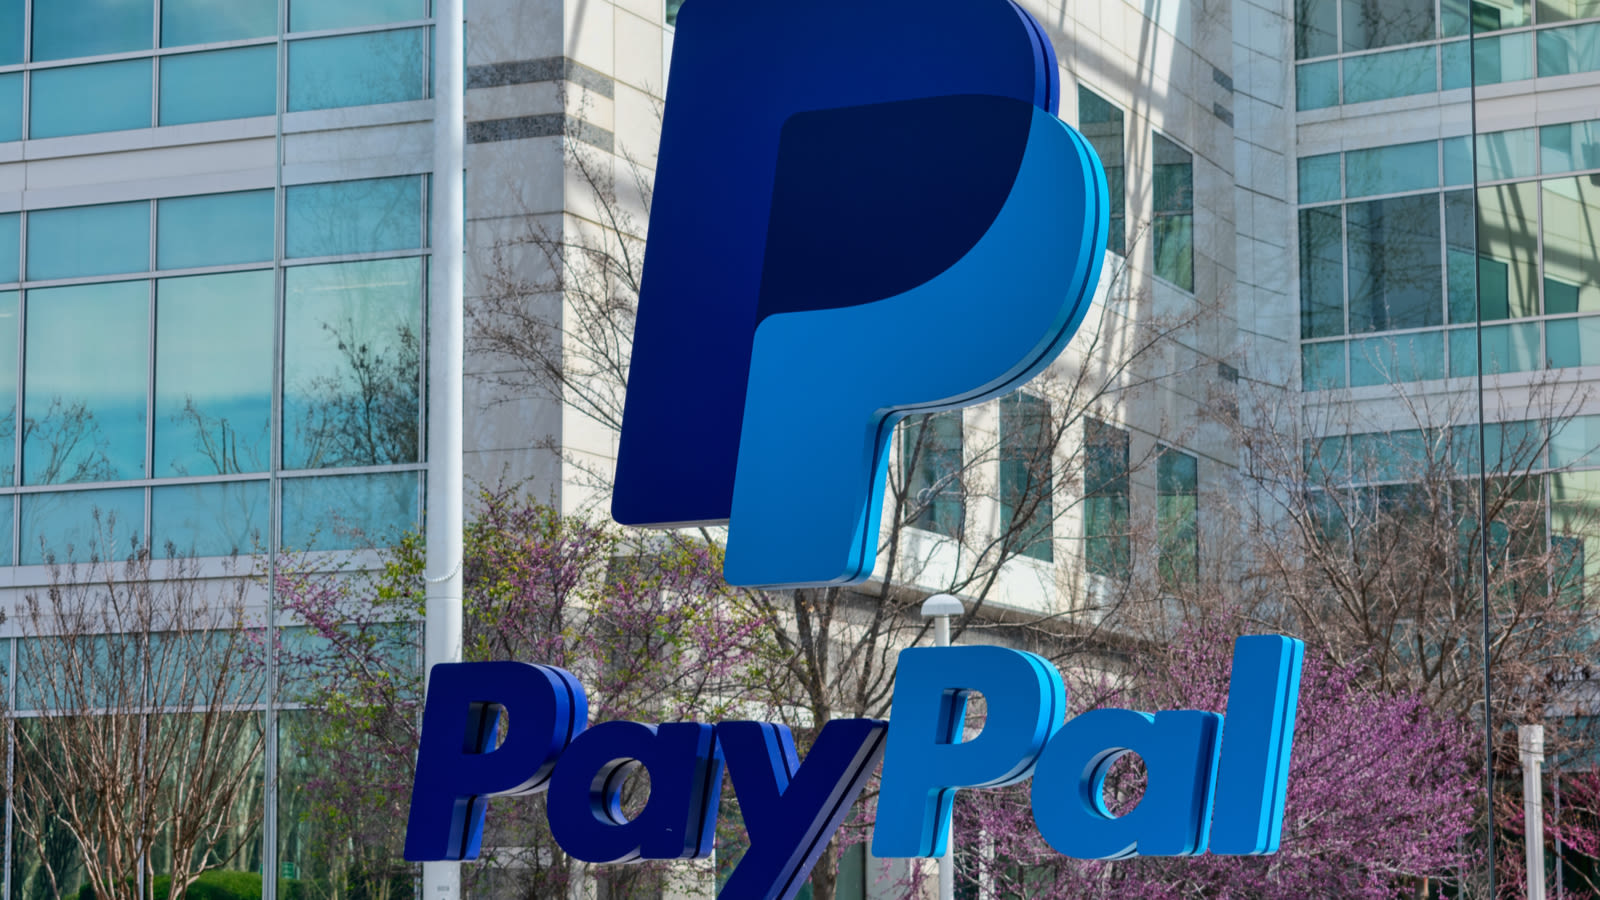 PayPal Stock Prediction: $90 Will Be Nice and Easy